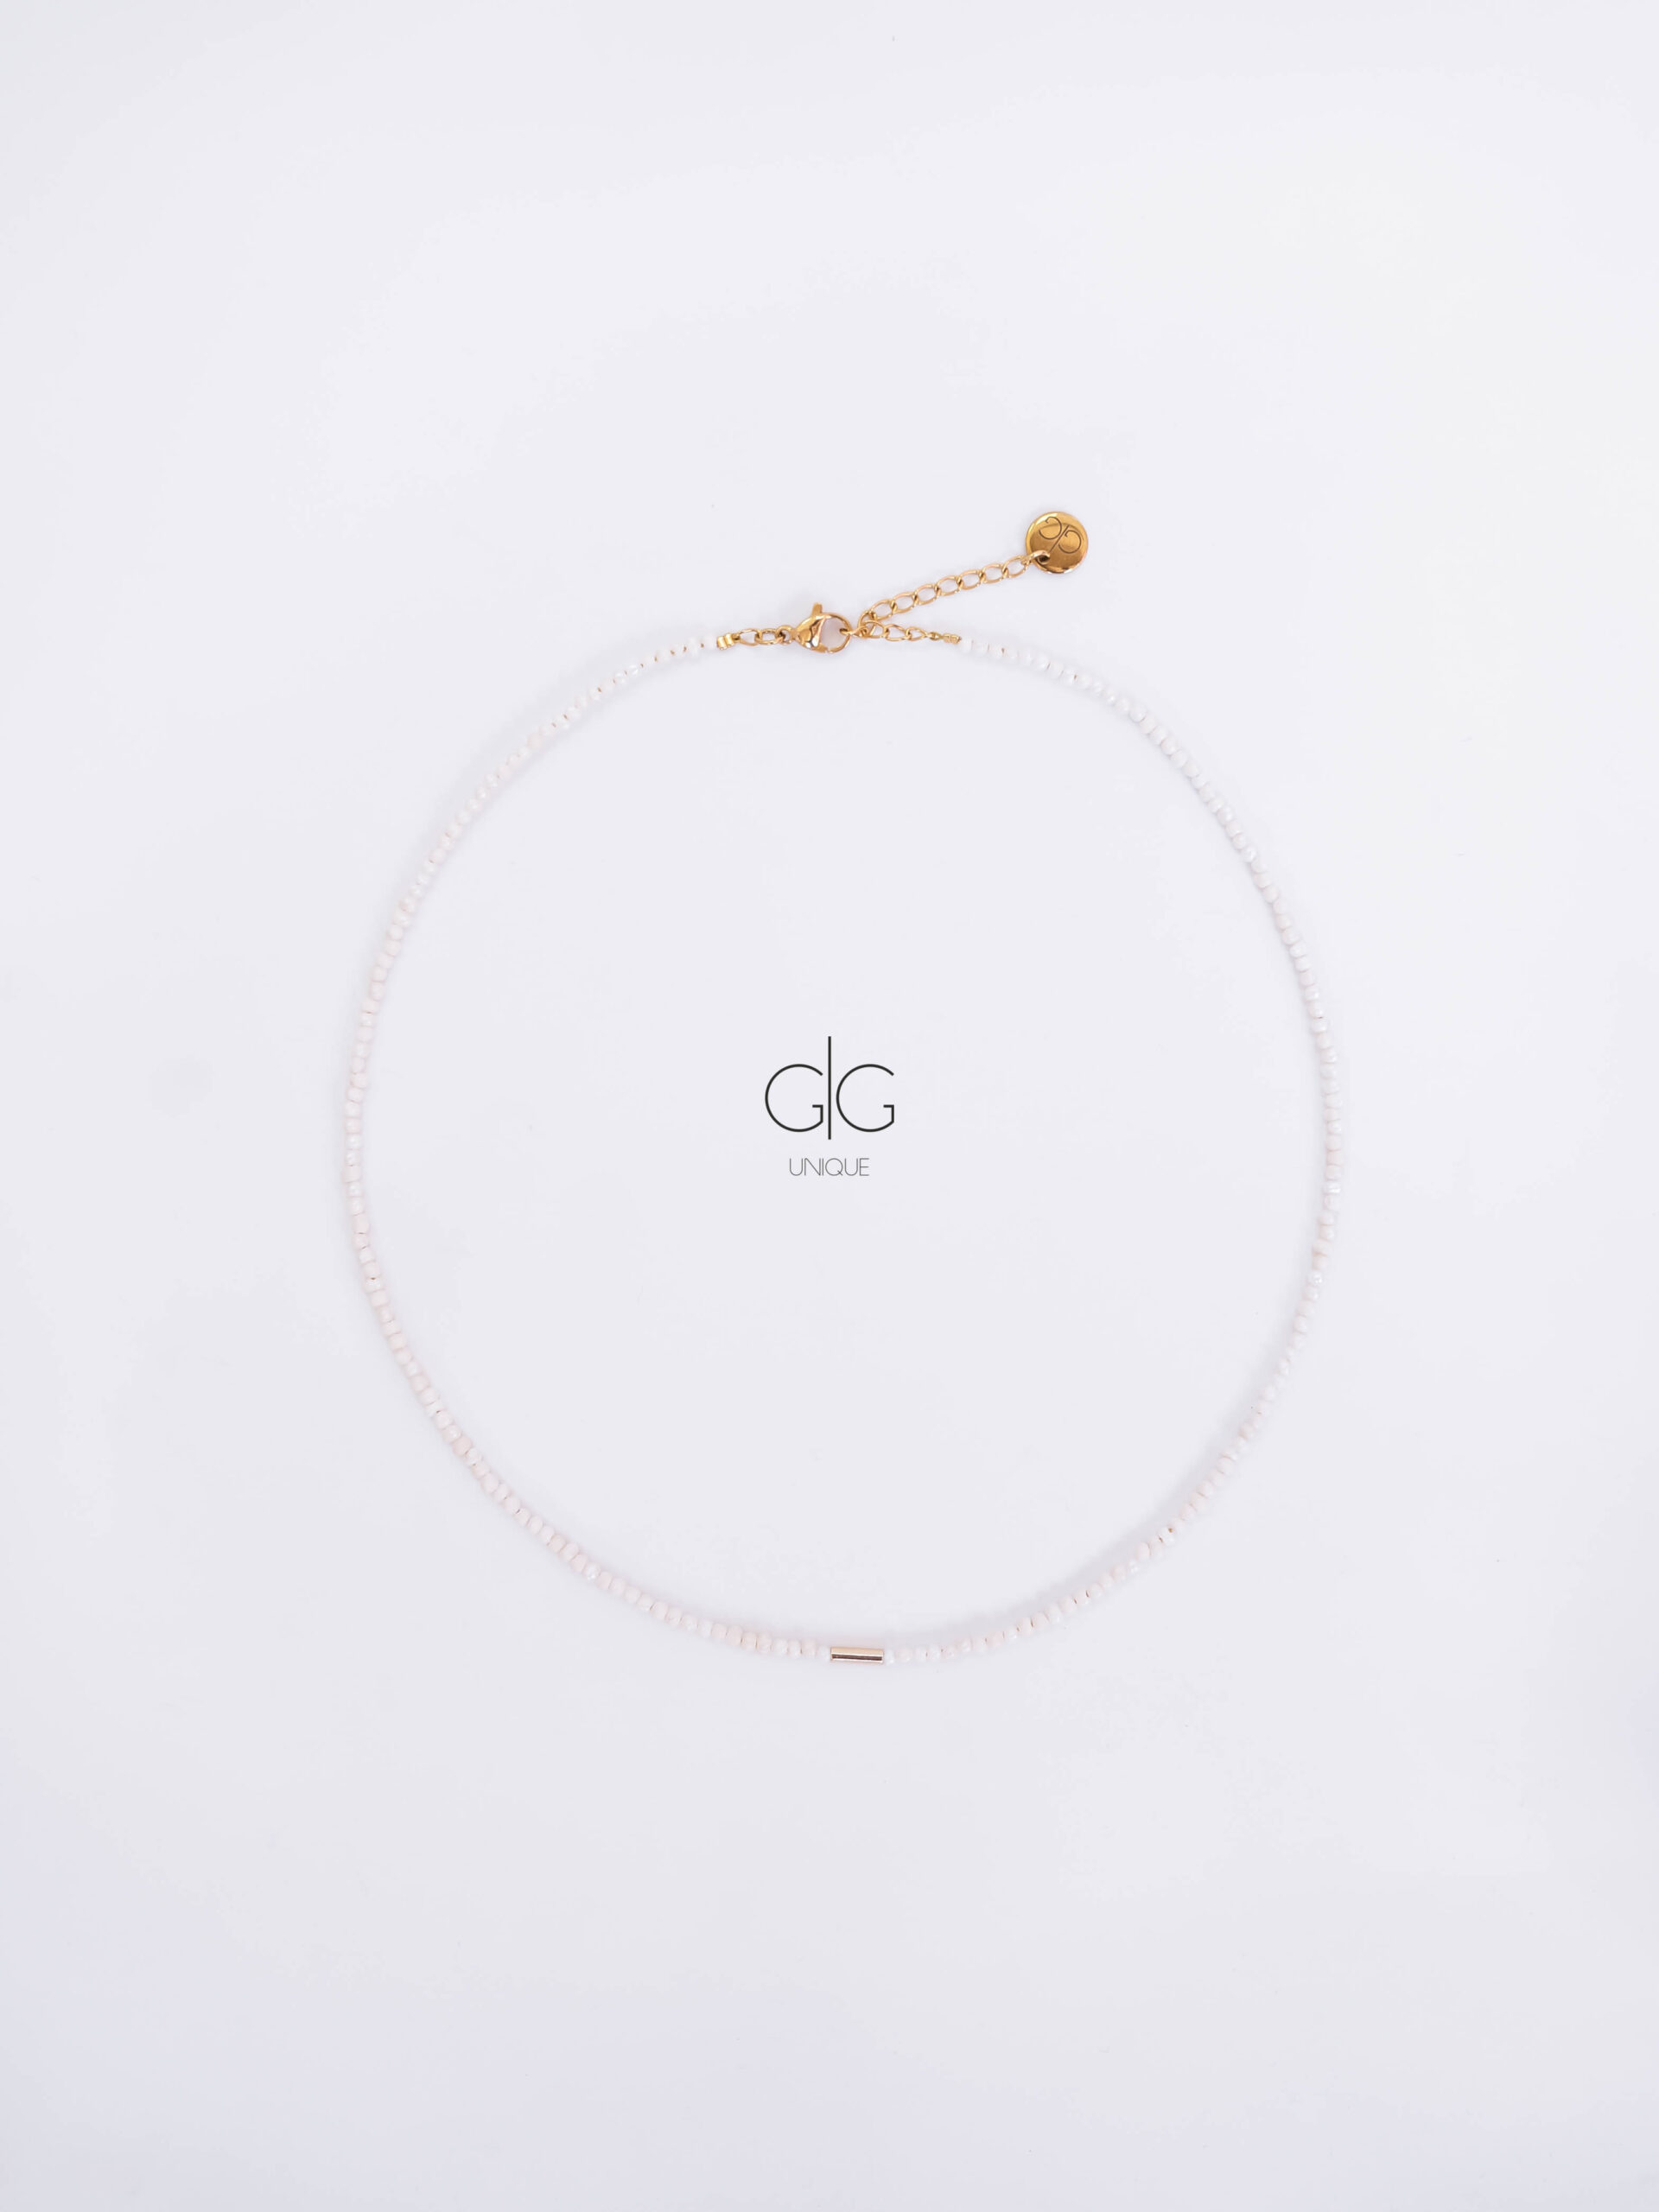 Delicate pearl necklace with gold detail - gg unique